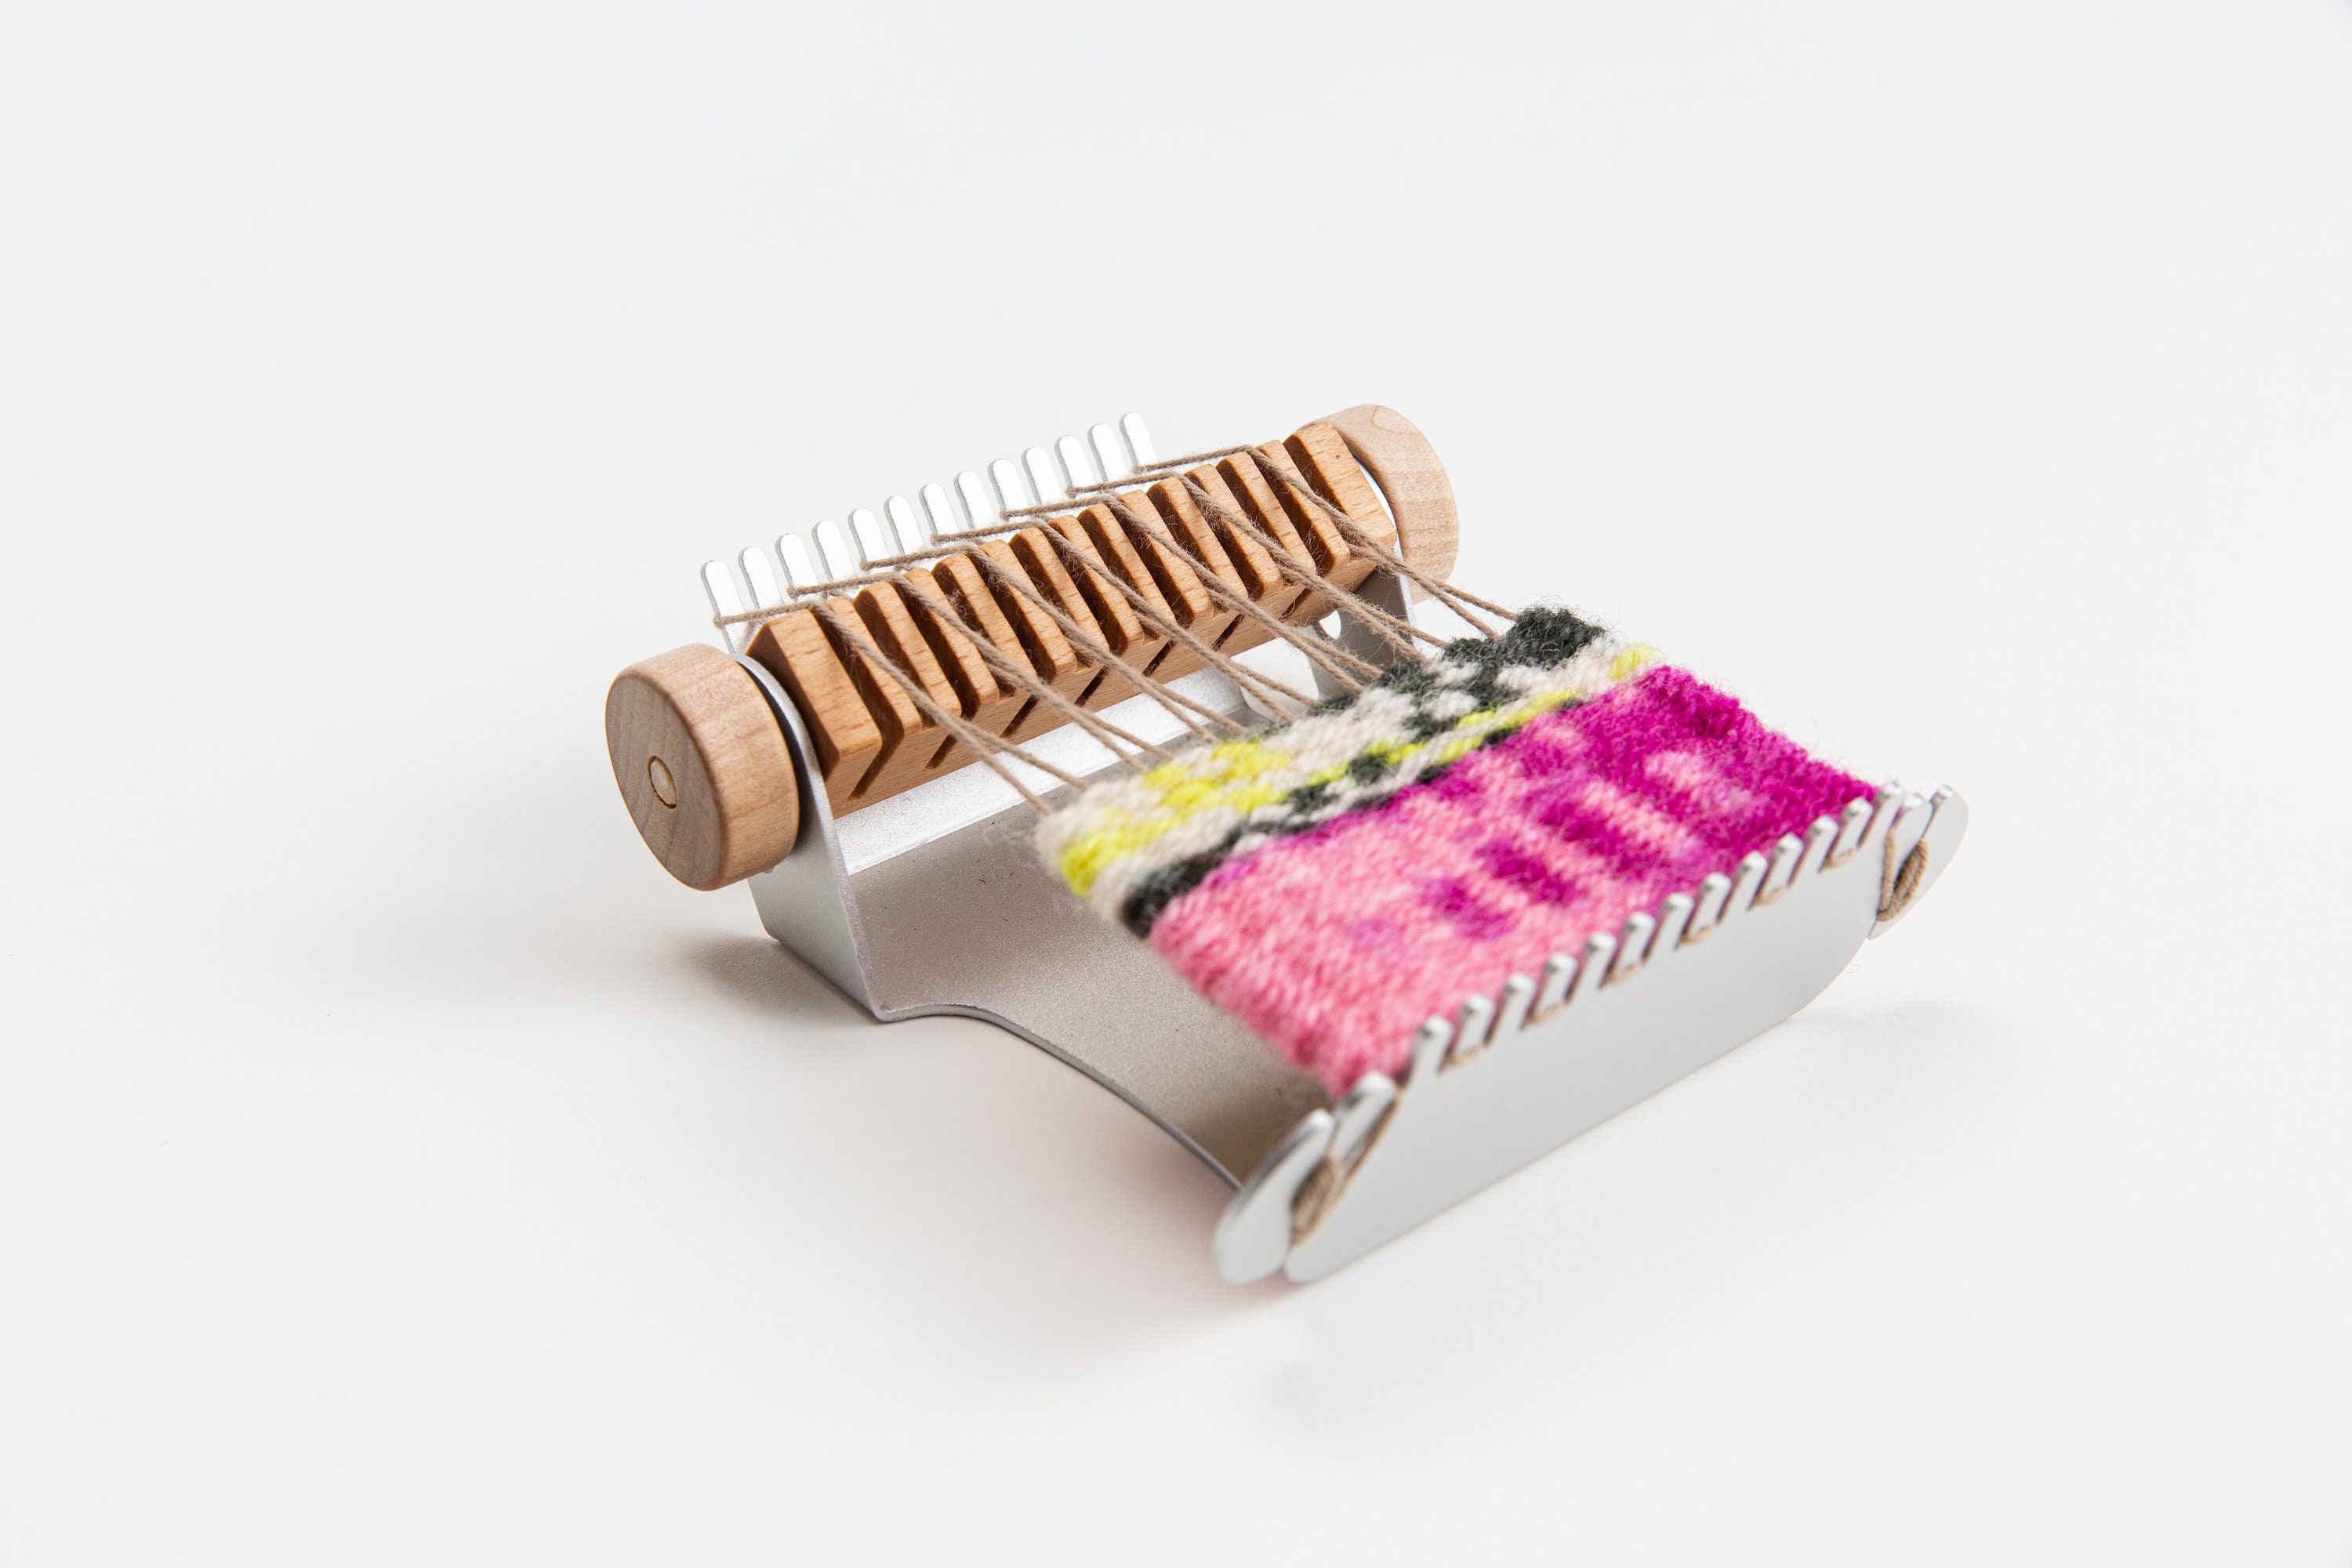 Teeny loom for easy on-the-go crafts. Be creative anywhere — boomloom